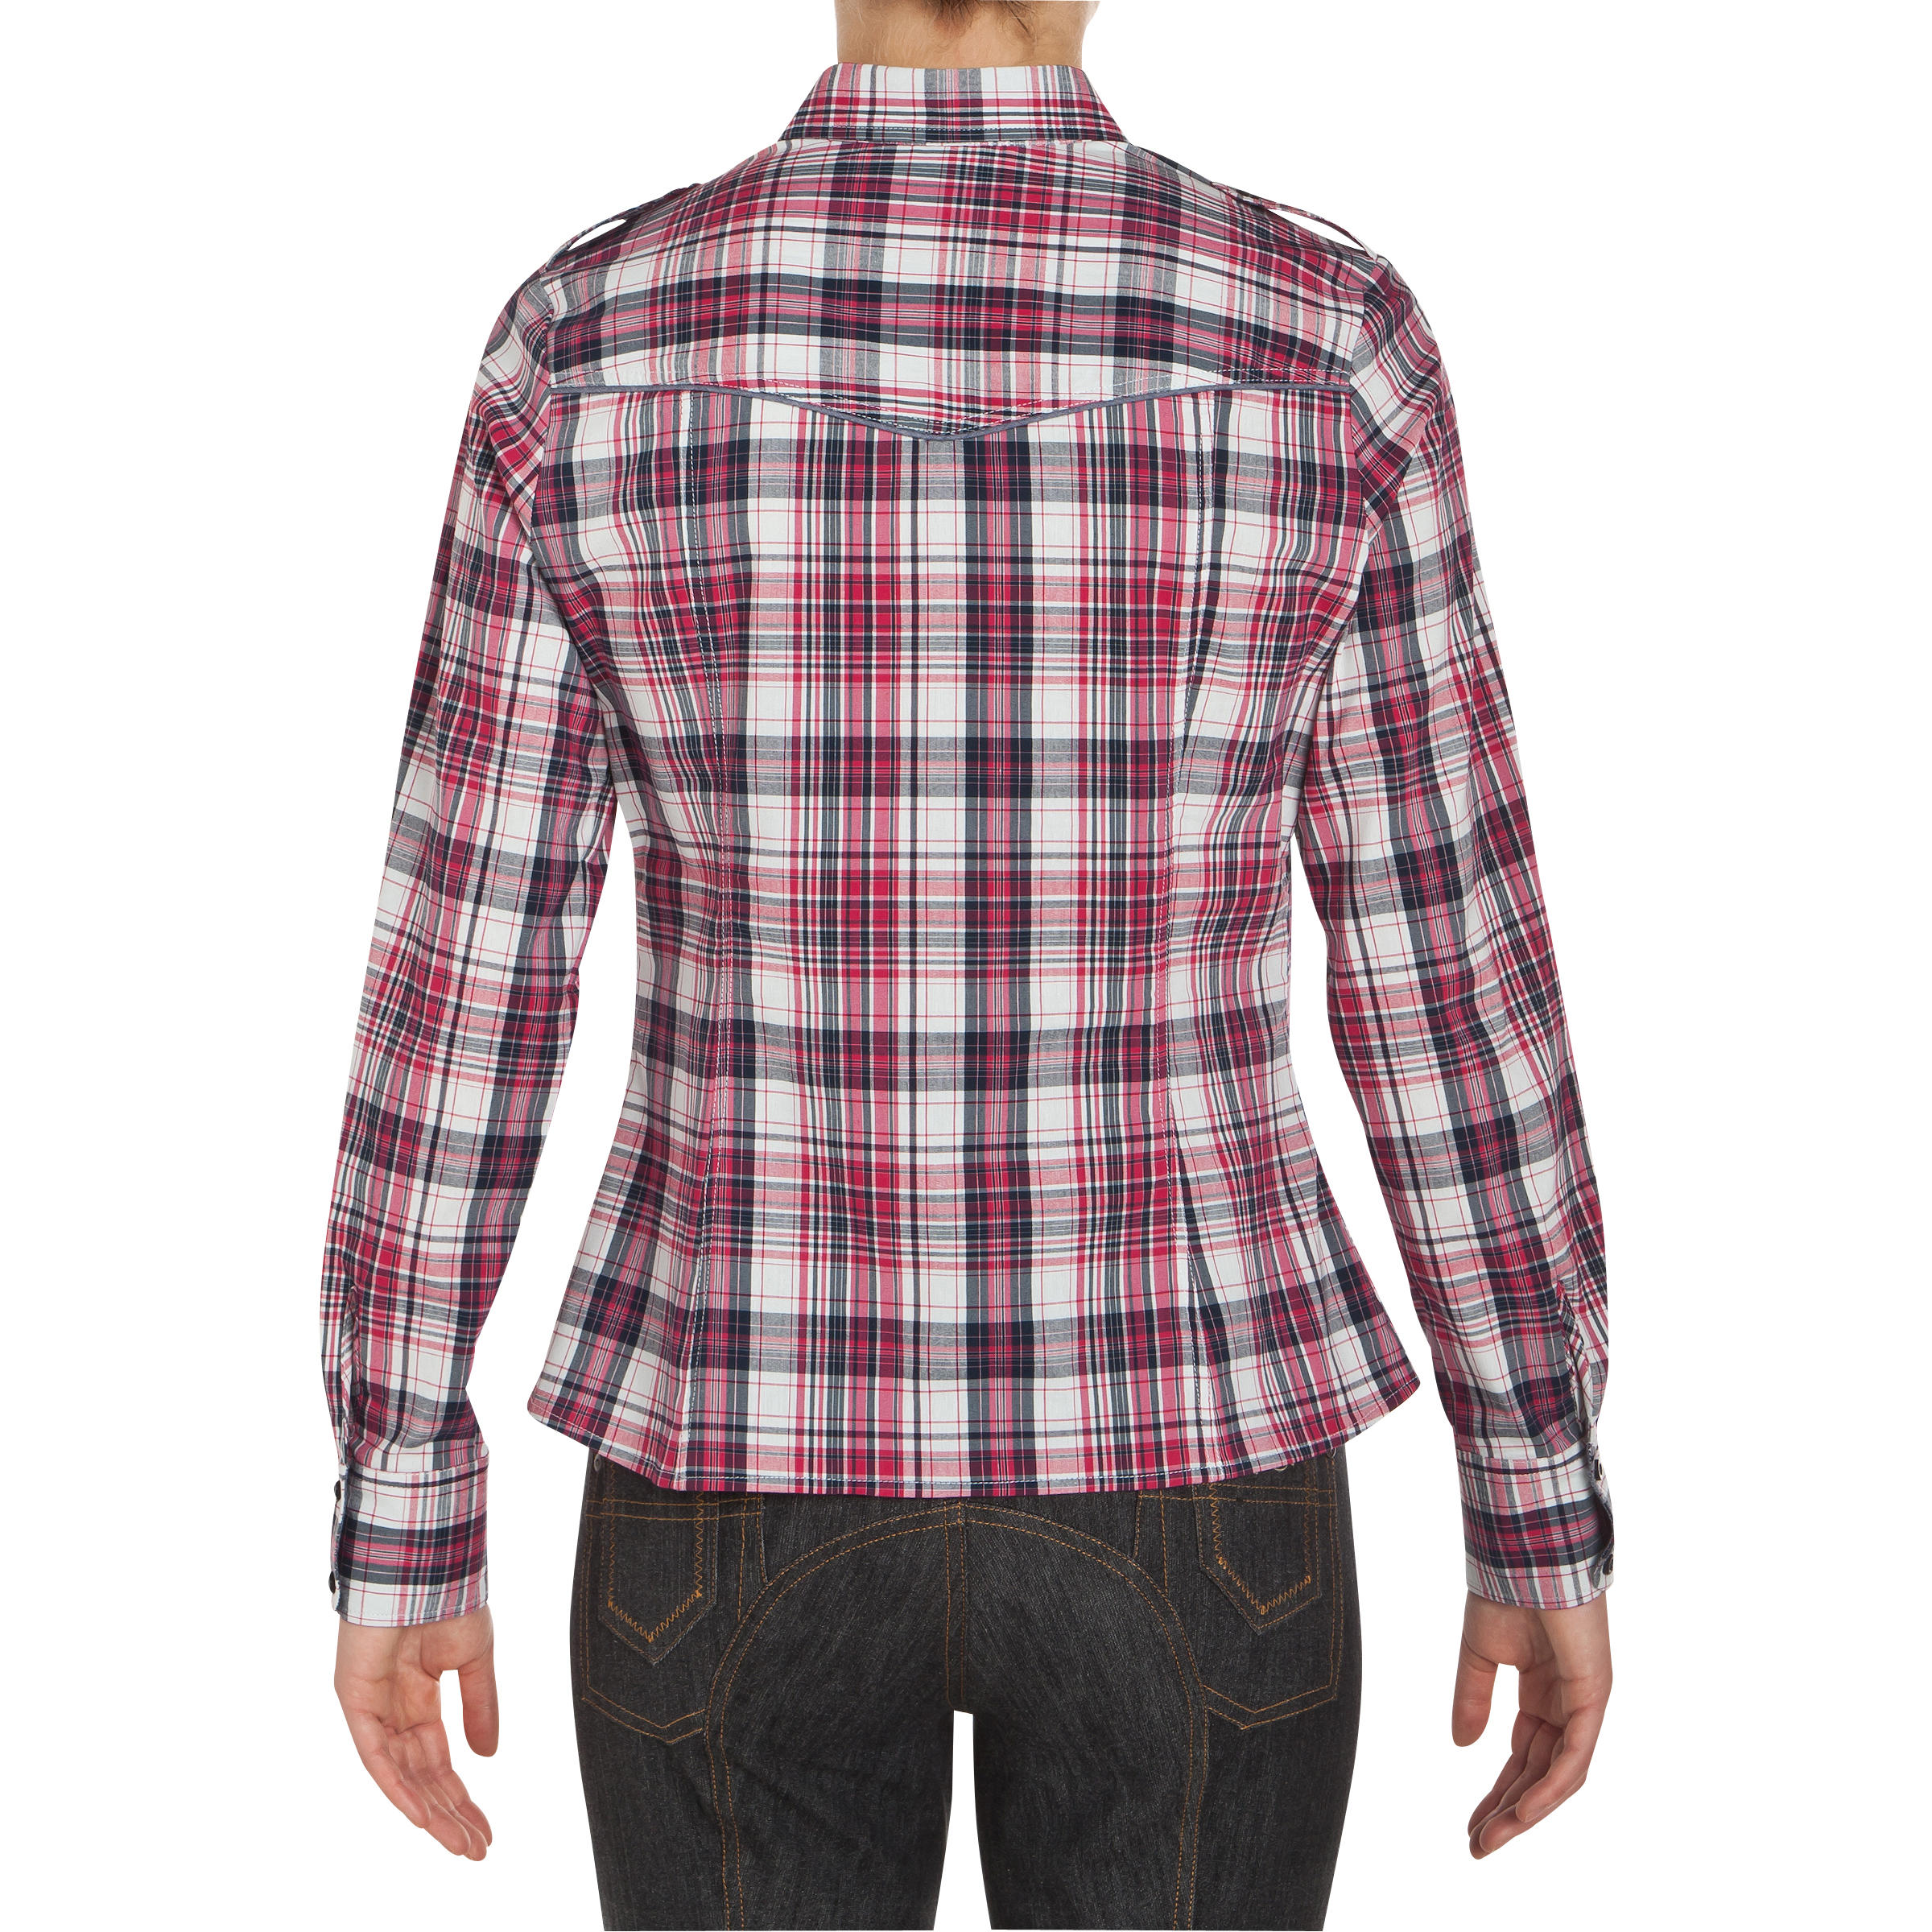 Sentier Women's Long-Sleeved Horse Riding Shirt - Pink and White Checks 5/11